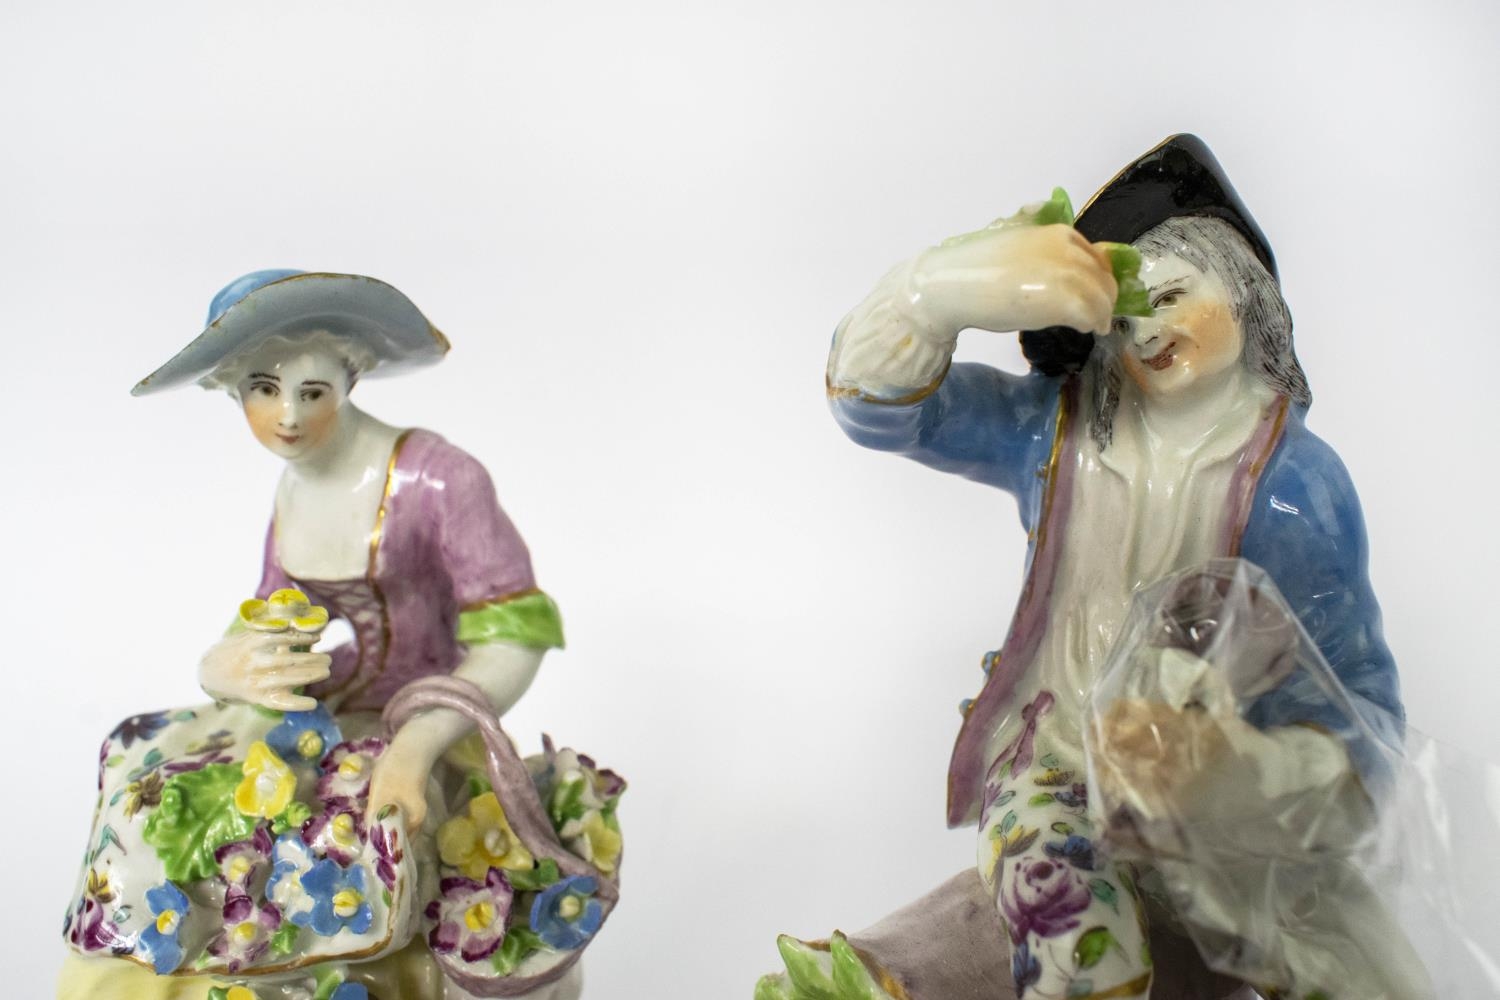 BOW PORCELAIN FIGURES, late 18th century Rococo, a lady with a basket of flowers and a gentleman - Image 4 of 6